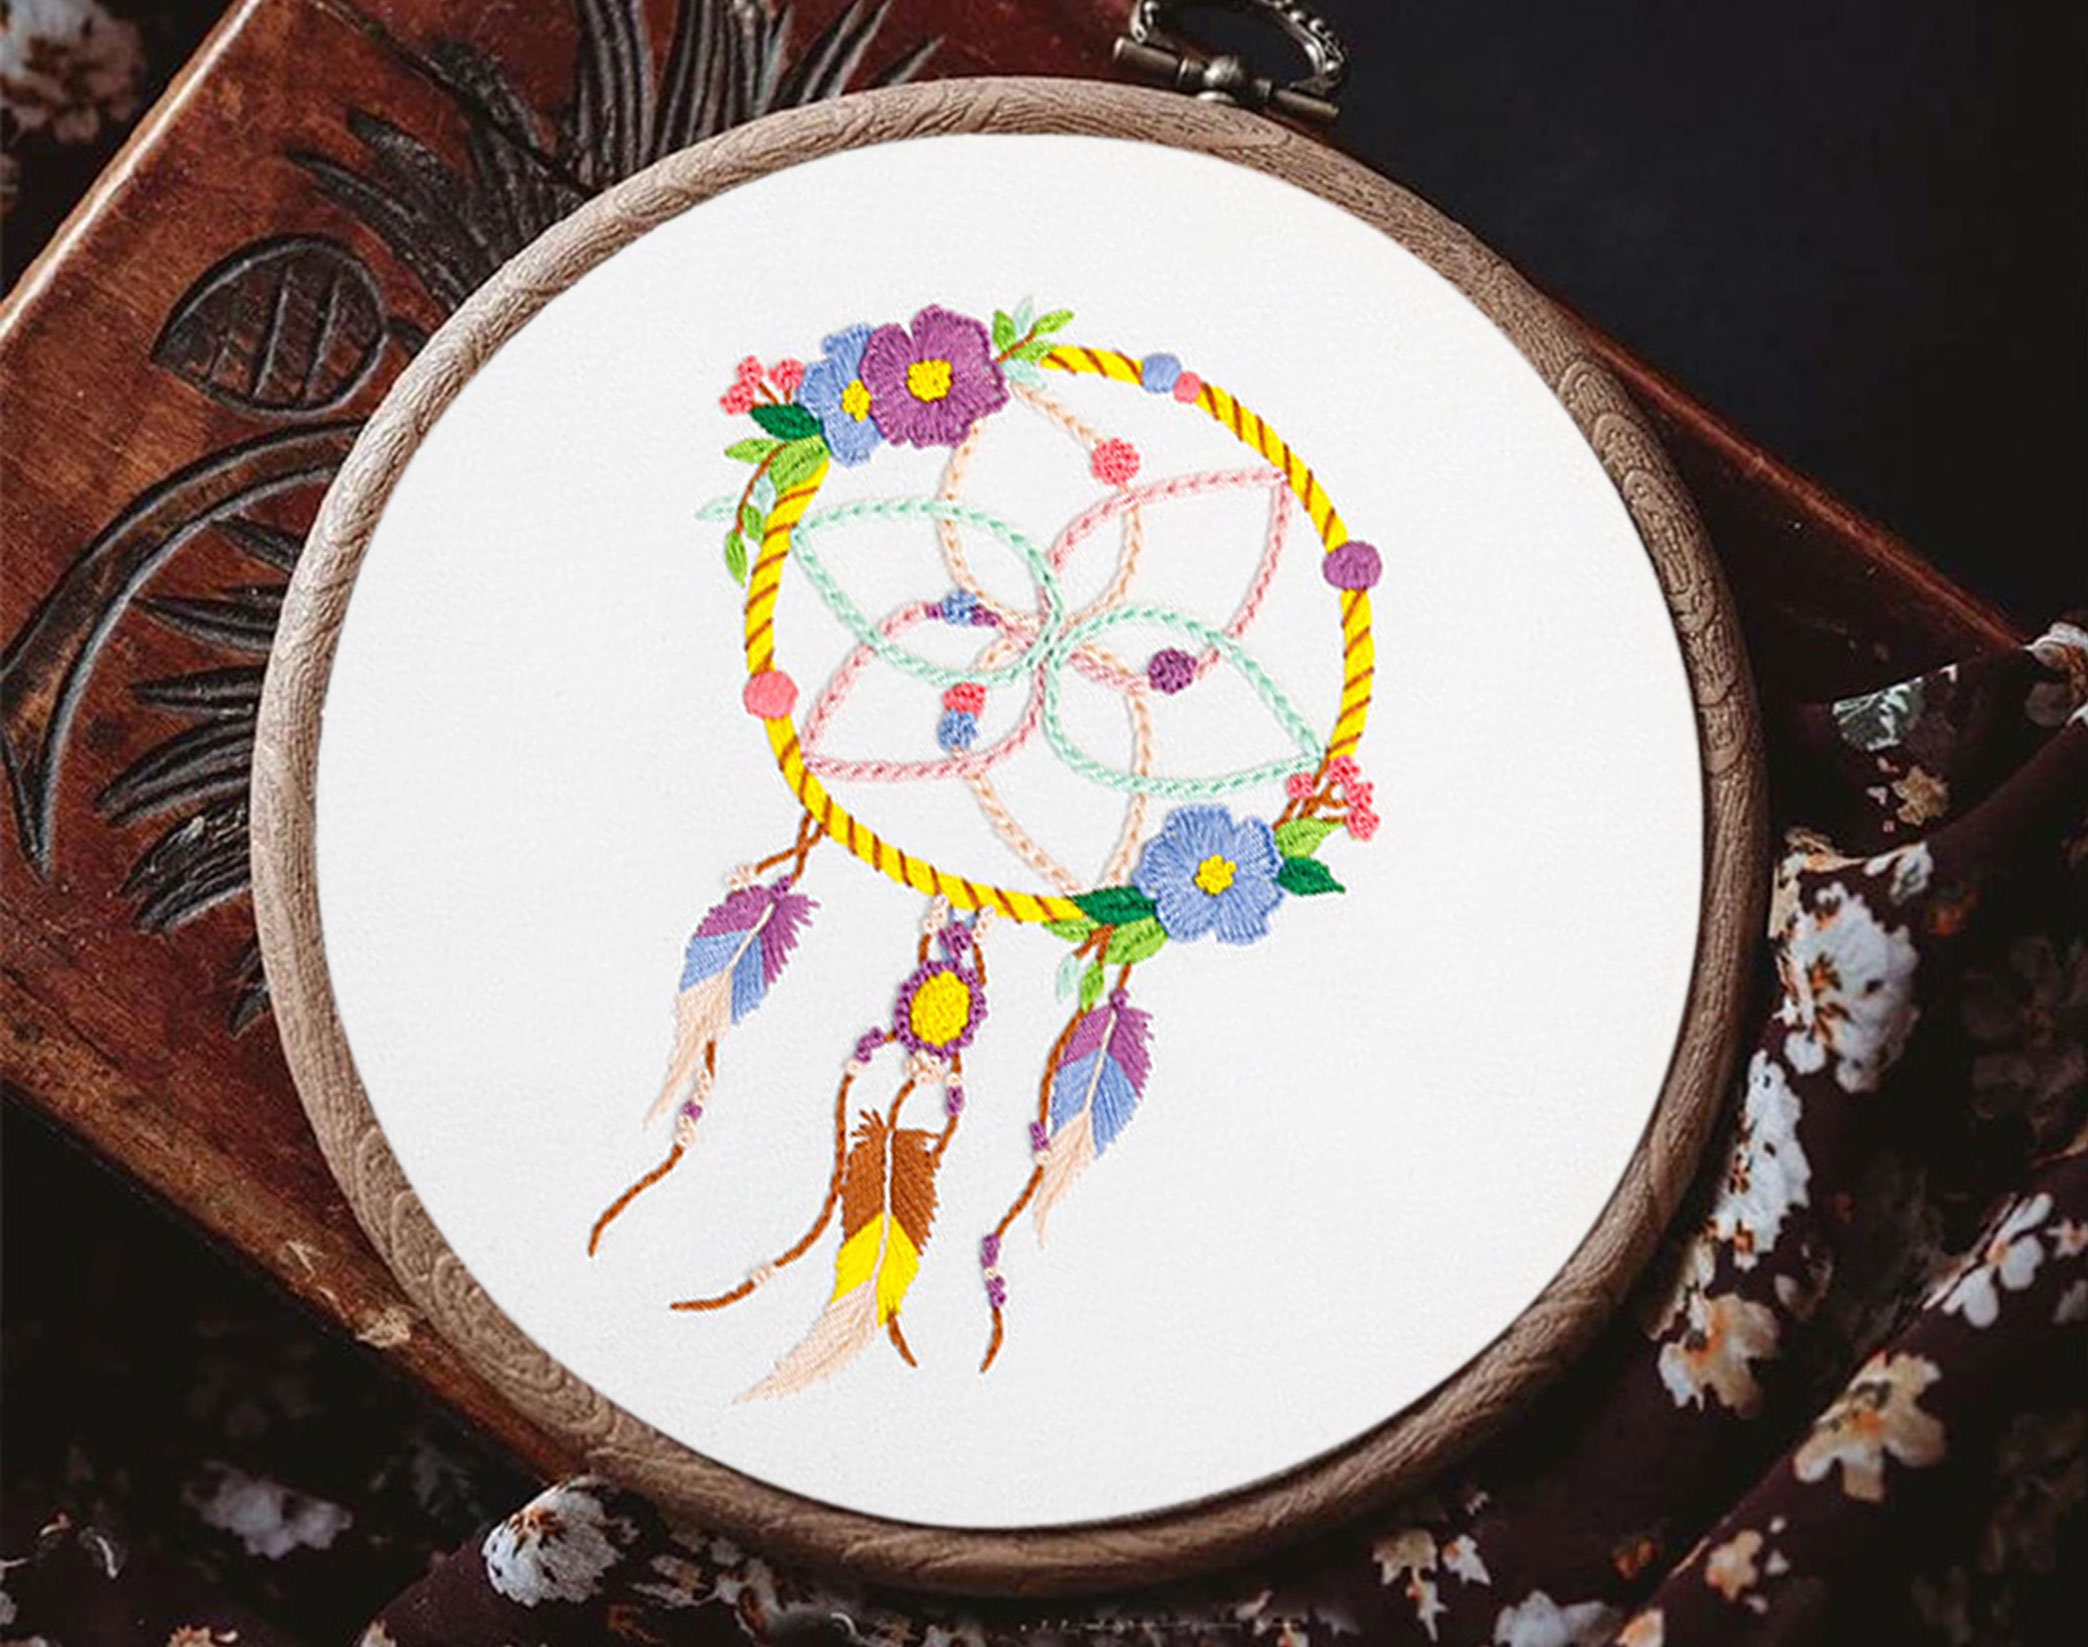 Dream Catcher Embroidery Kit for Beginners, DIY Hand Embroidery Kids Room  Decoration Kit,needlework Starter Kit,embroidery Kit for Kids-8in 